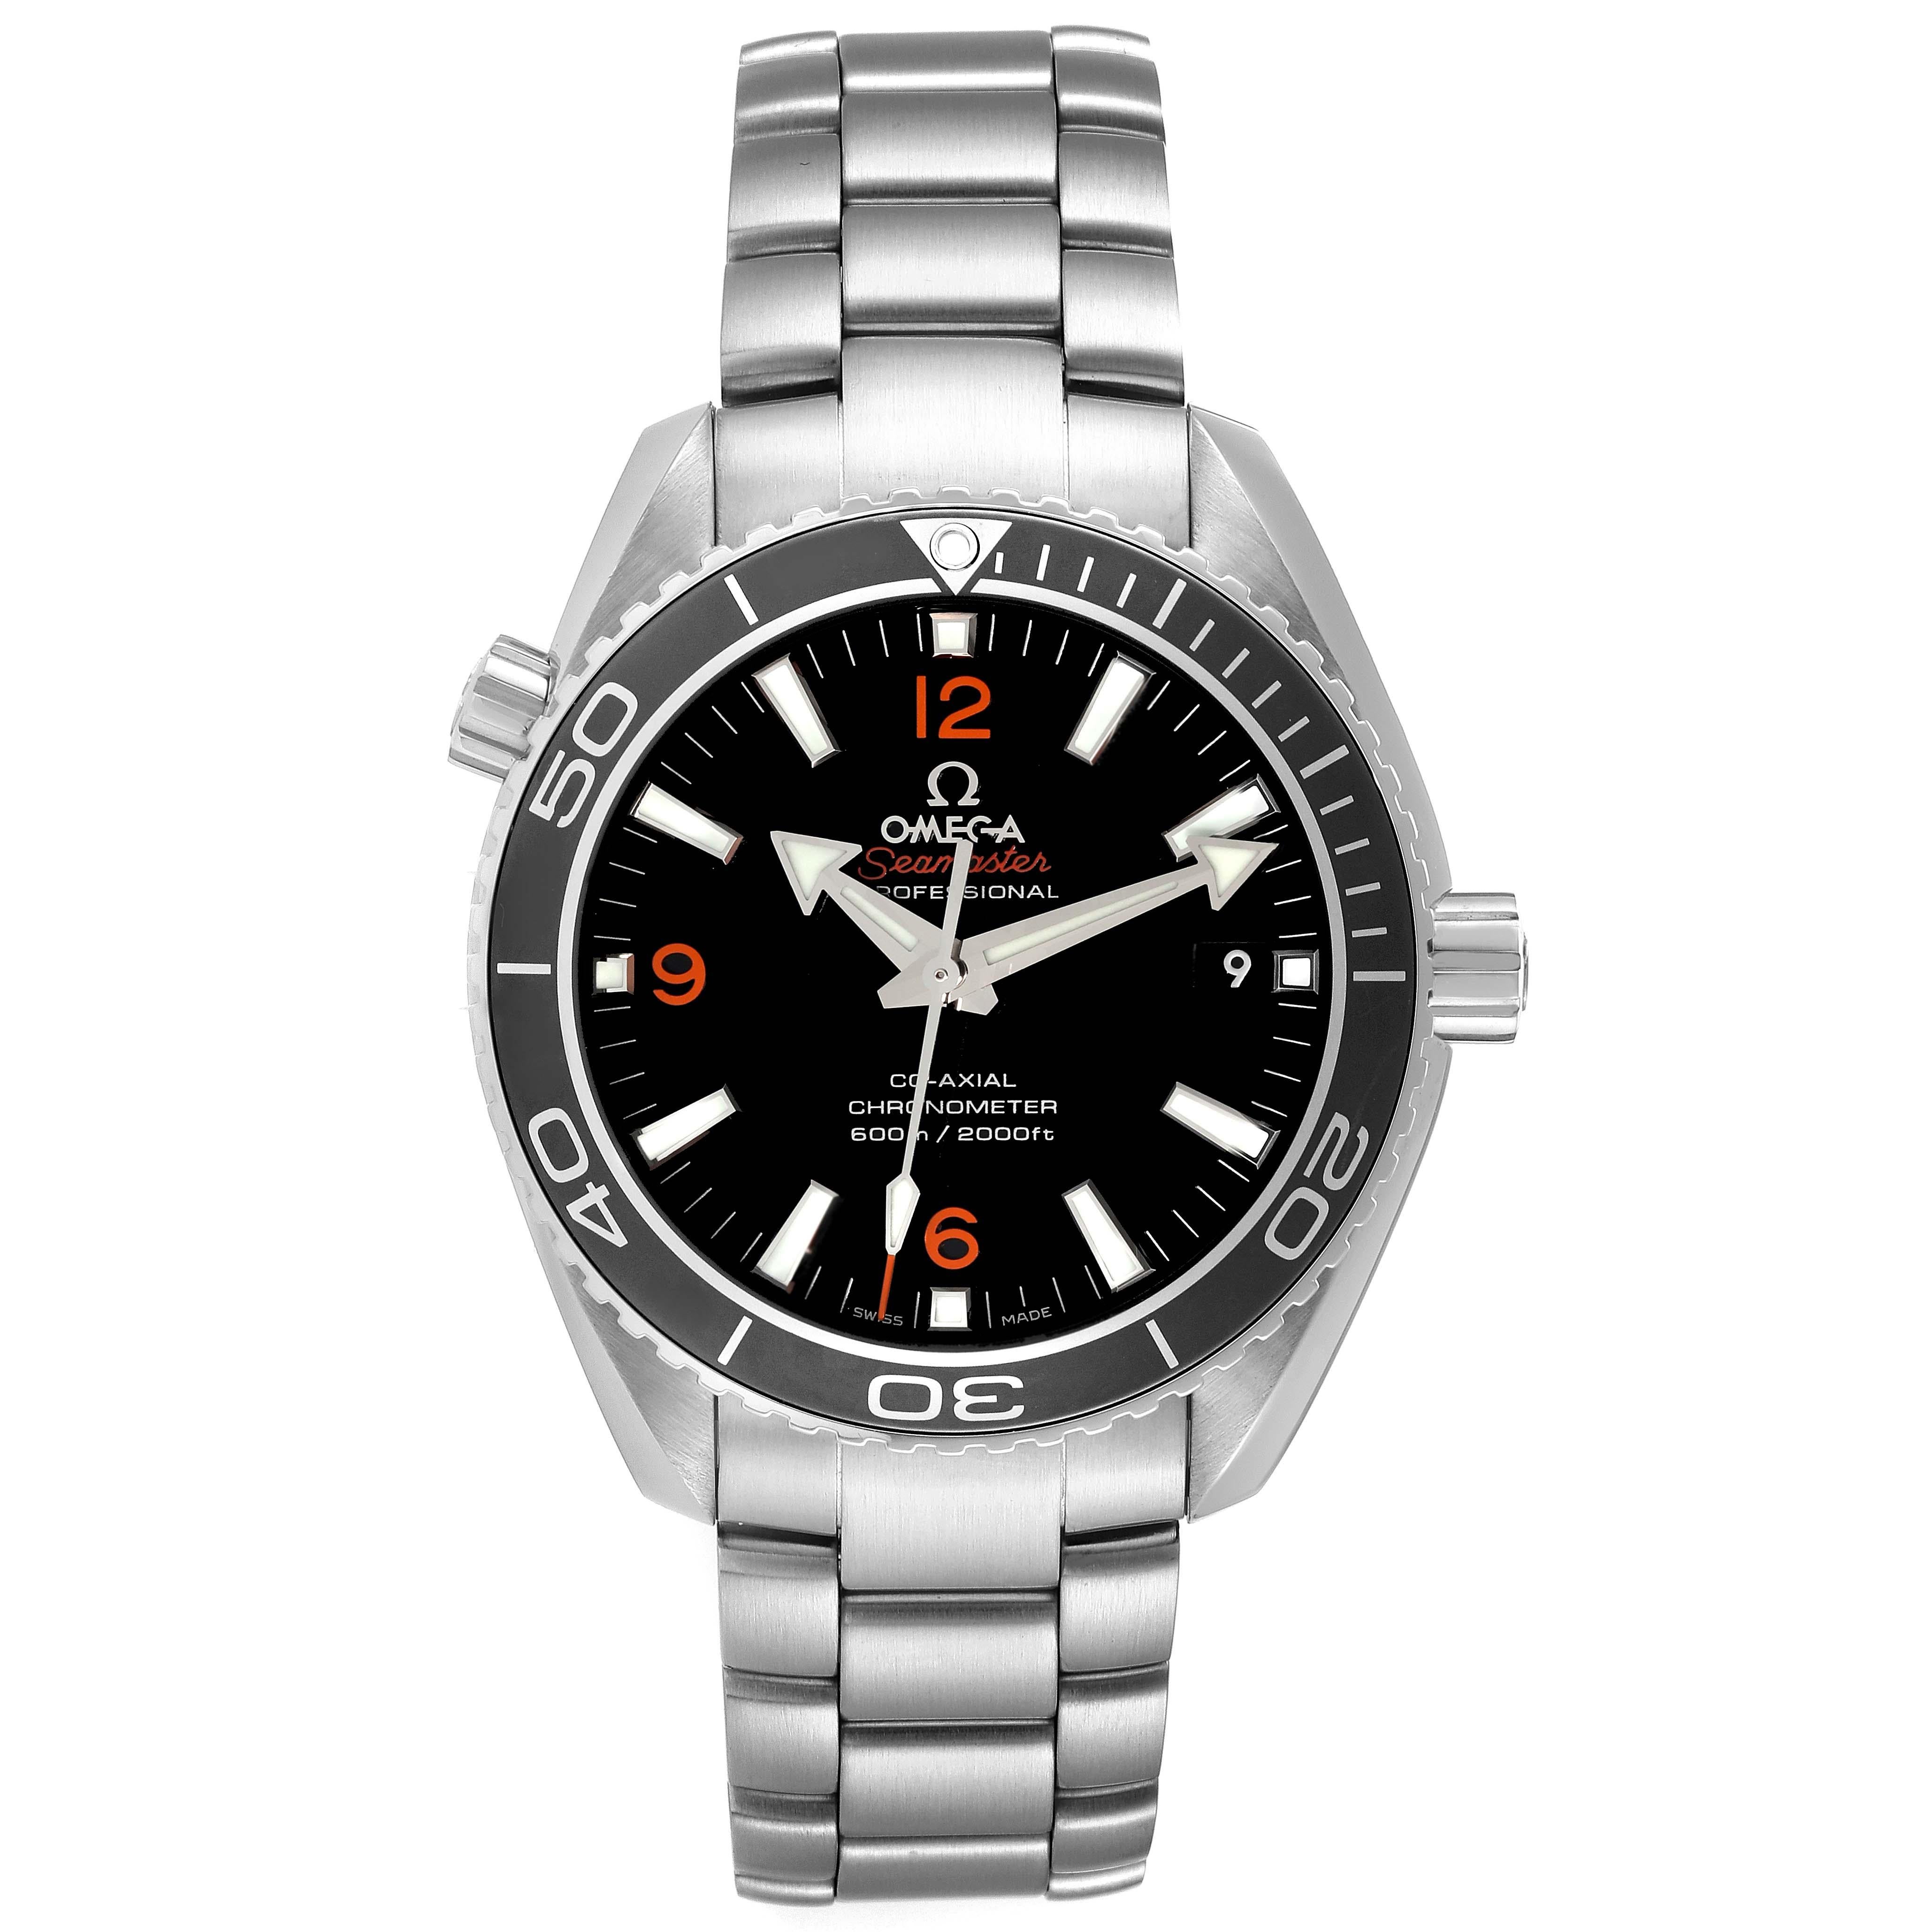 Omega Seamaster Planet Ocean 600M Steel Mens Watch 232.30.42.21.01.003 Box Card. Automatic self-winding chronometer movement. Stainless steel round case 42.0 mm in diameter. Helium Escapement Valve at the 10 o'clock position. Black uni-directional